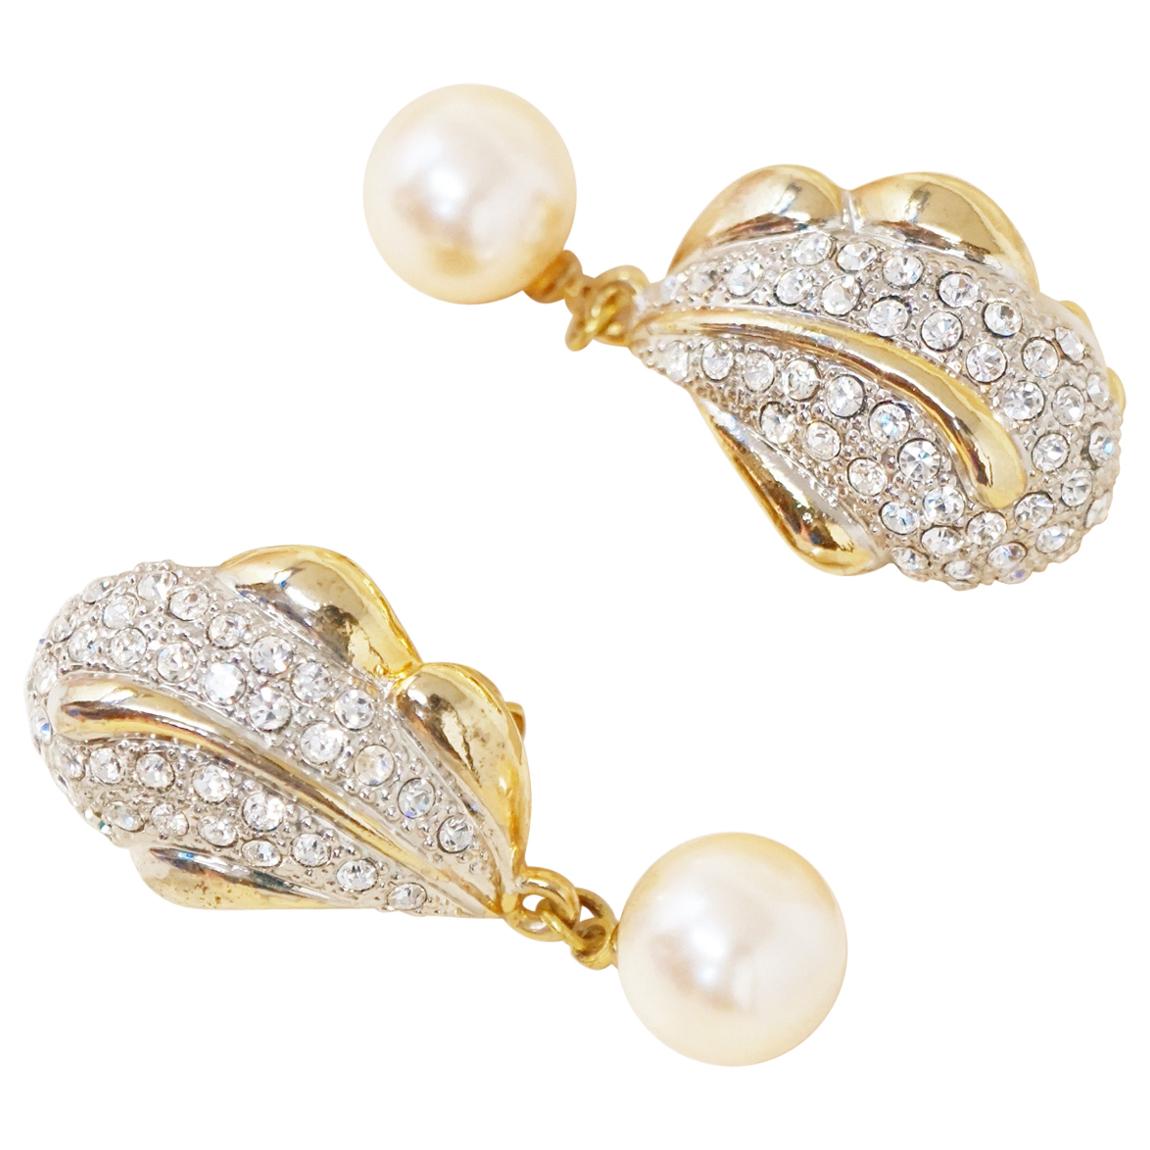 Vintage Gilded Crystal Pavé Statement Earrings with Drop Pearl, 1980s